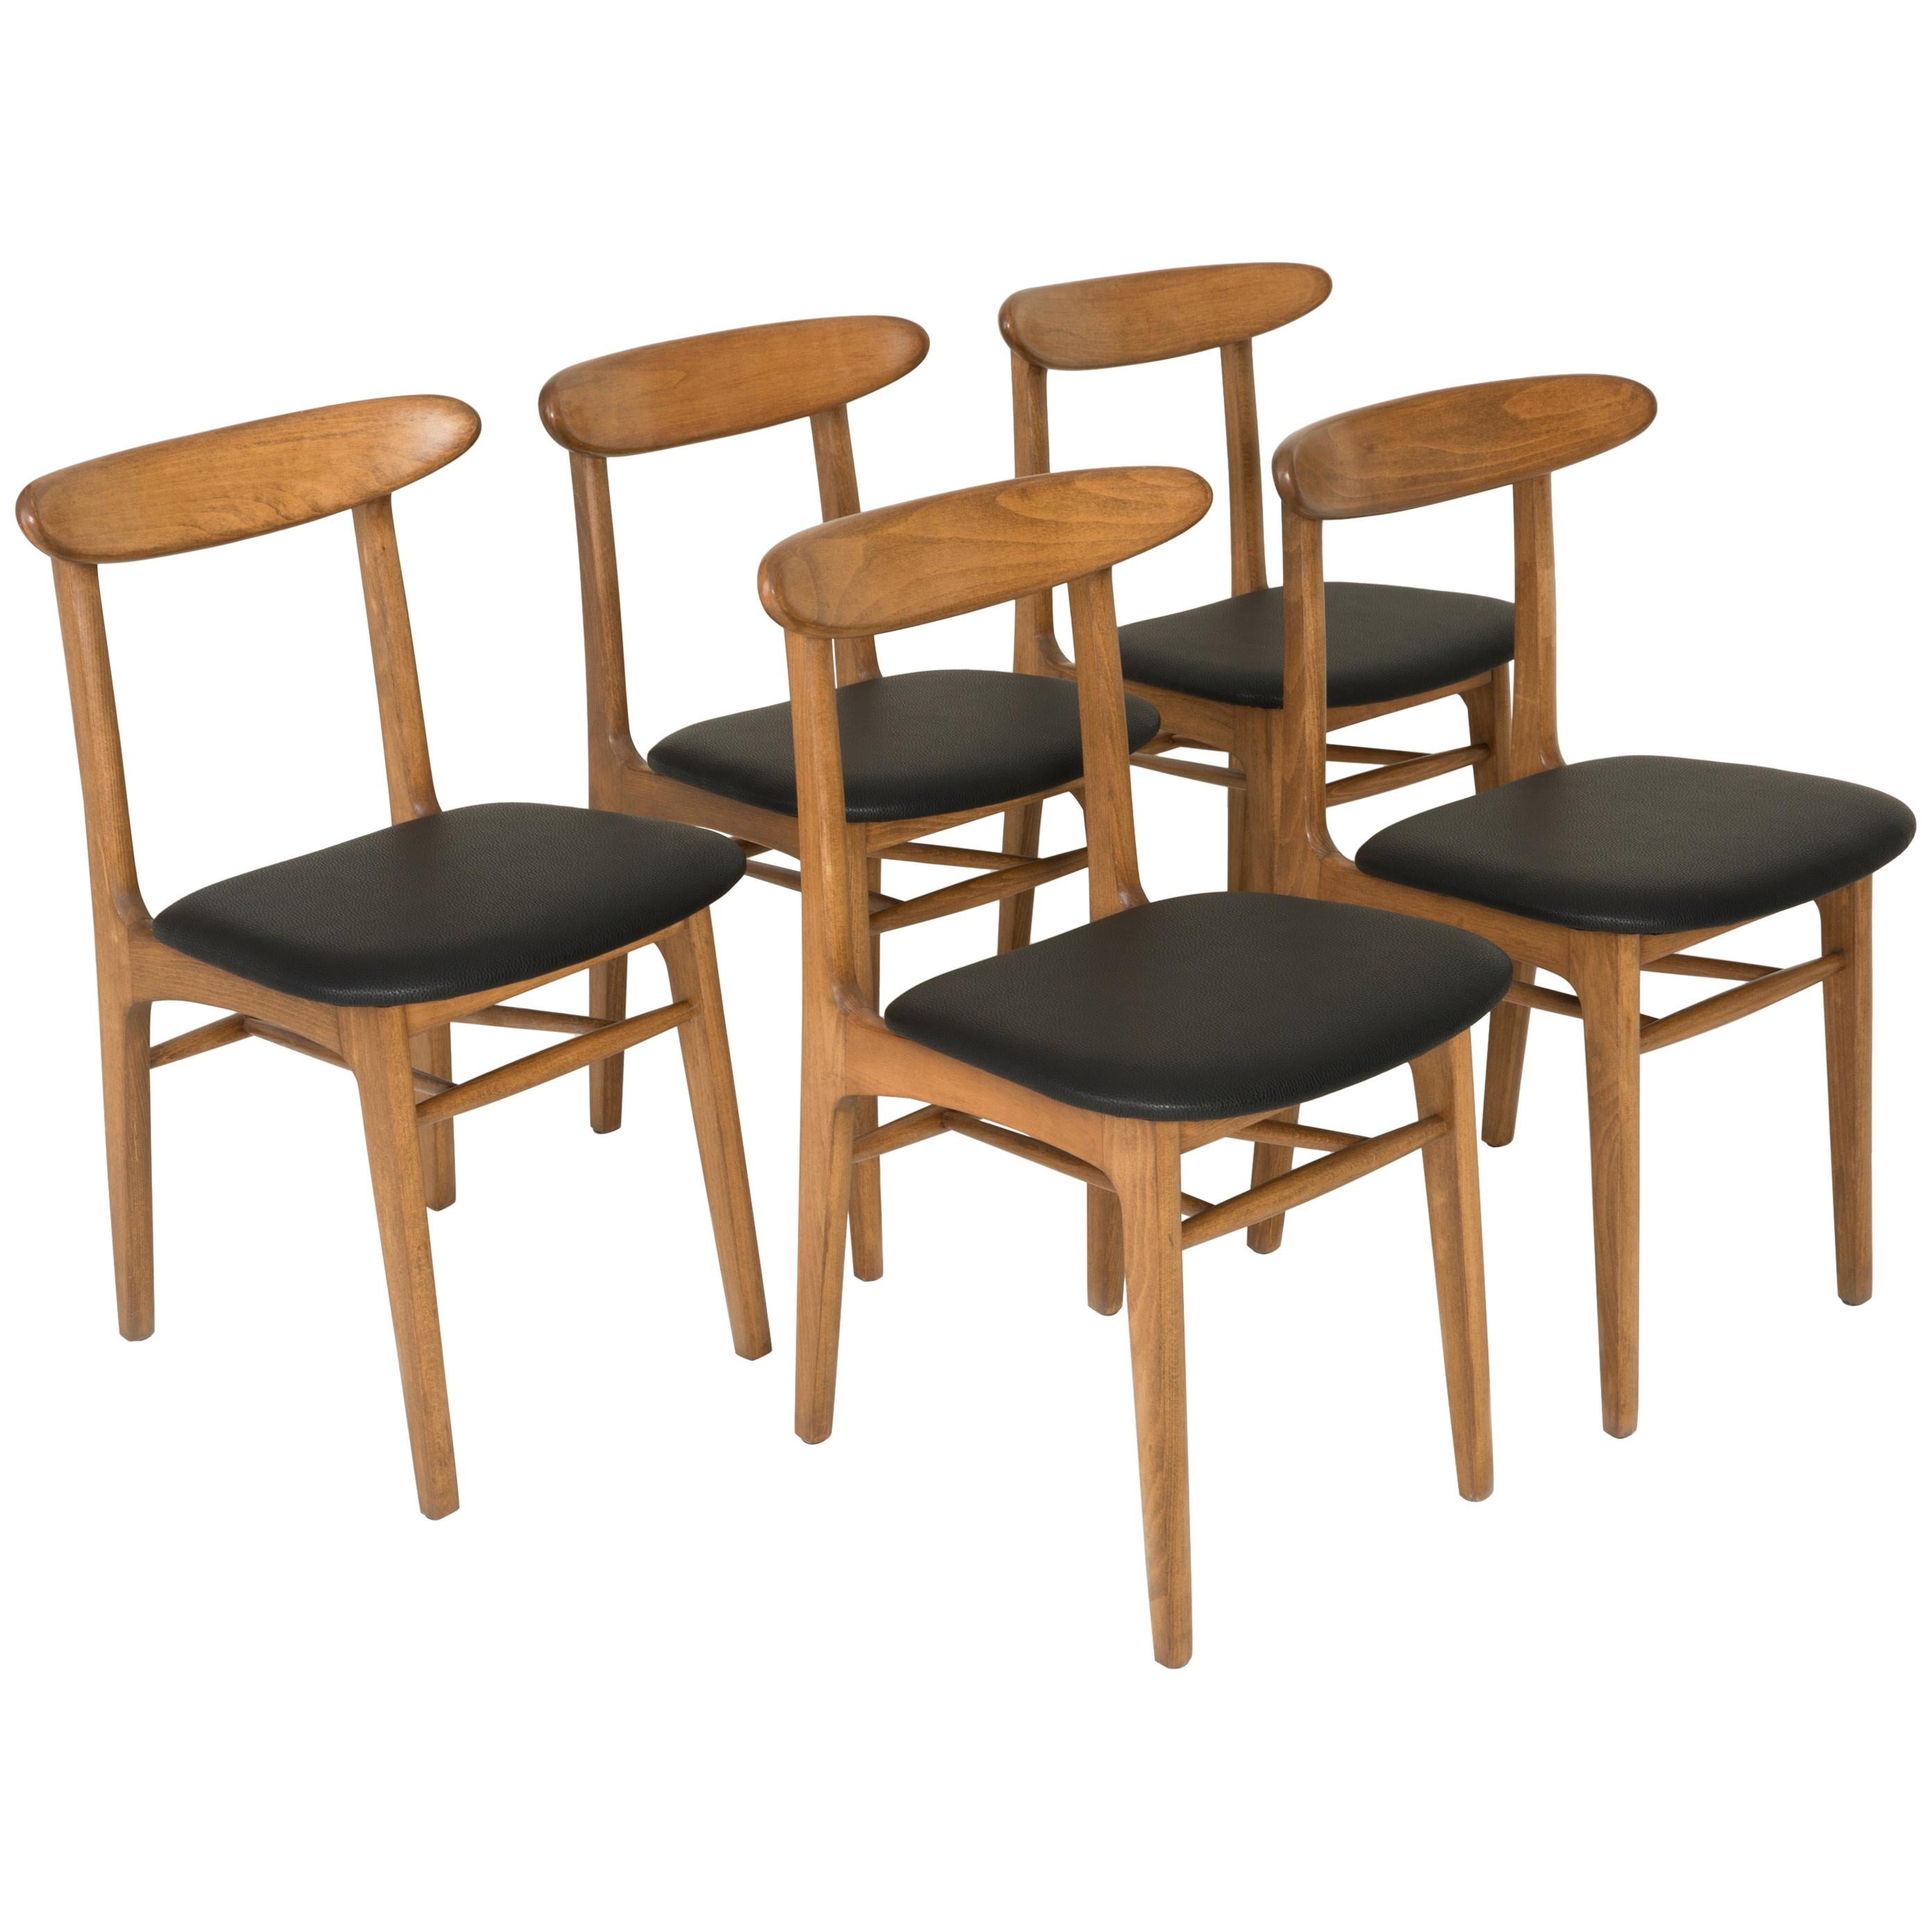 Set of Five Vintage Faux Leather Dining Chairs, 1960s